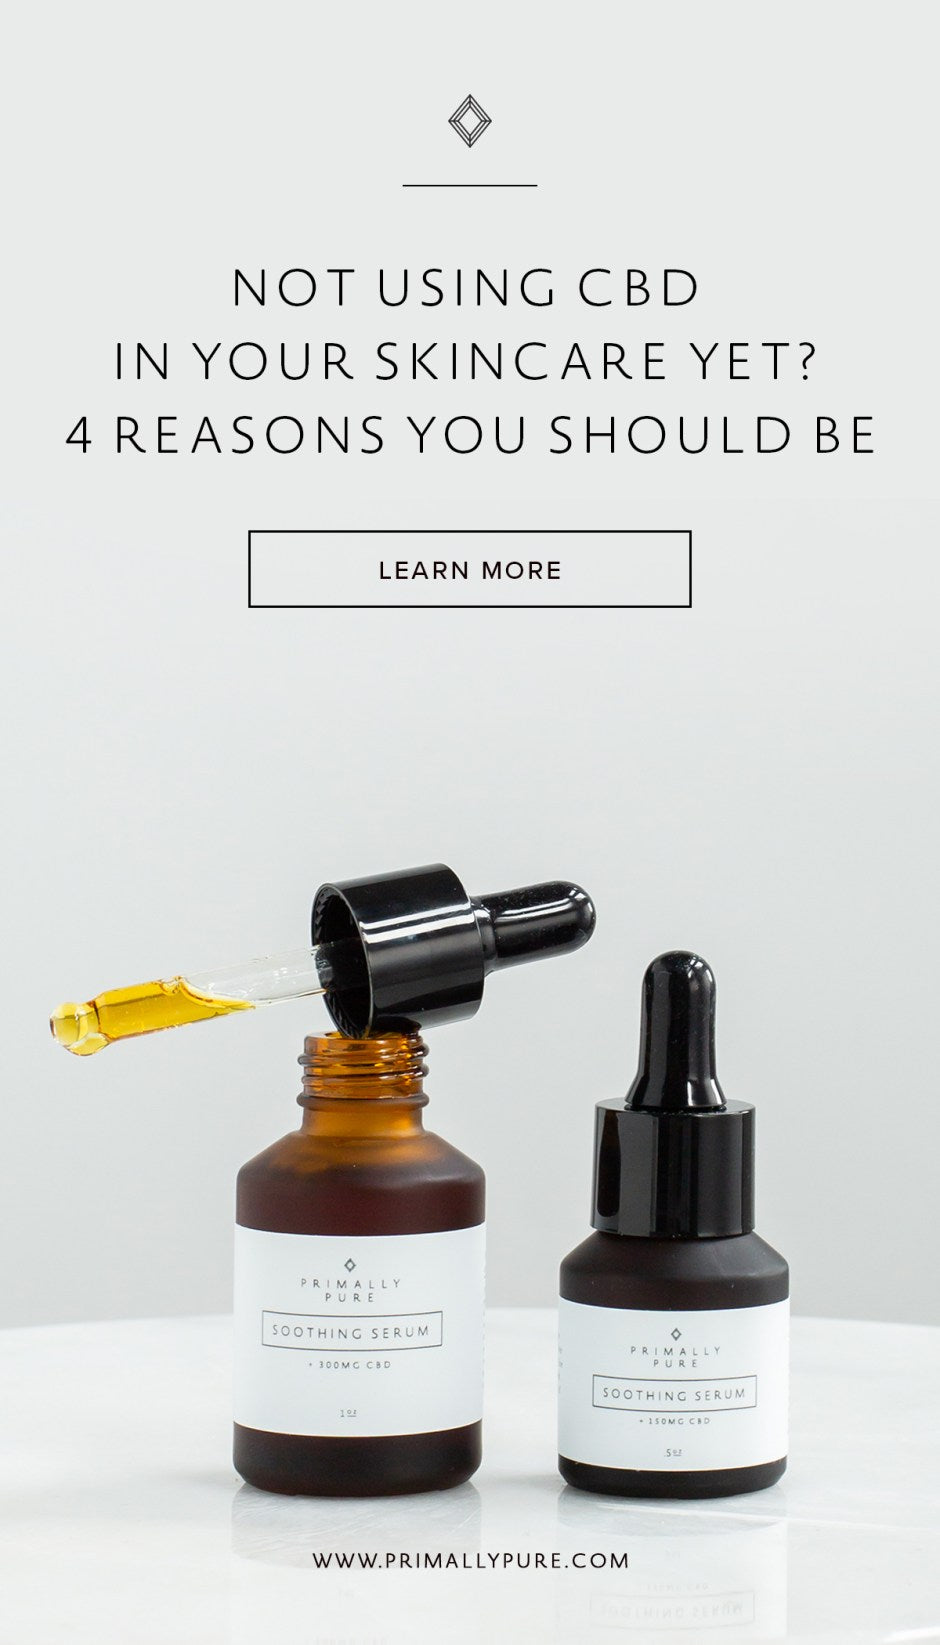 The hype around CBD Oil benefits is sweeping the skincare world. Not using CBD in your skincare routine yet? Here are 4 reasons you should be. | Primally Pure Skincare